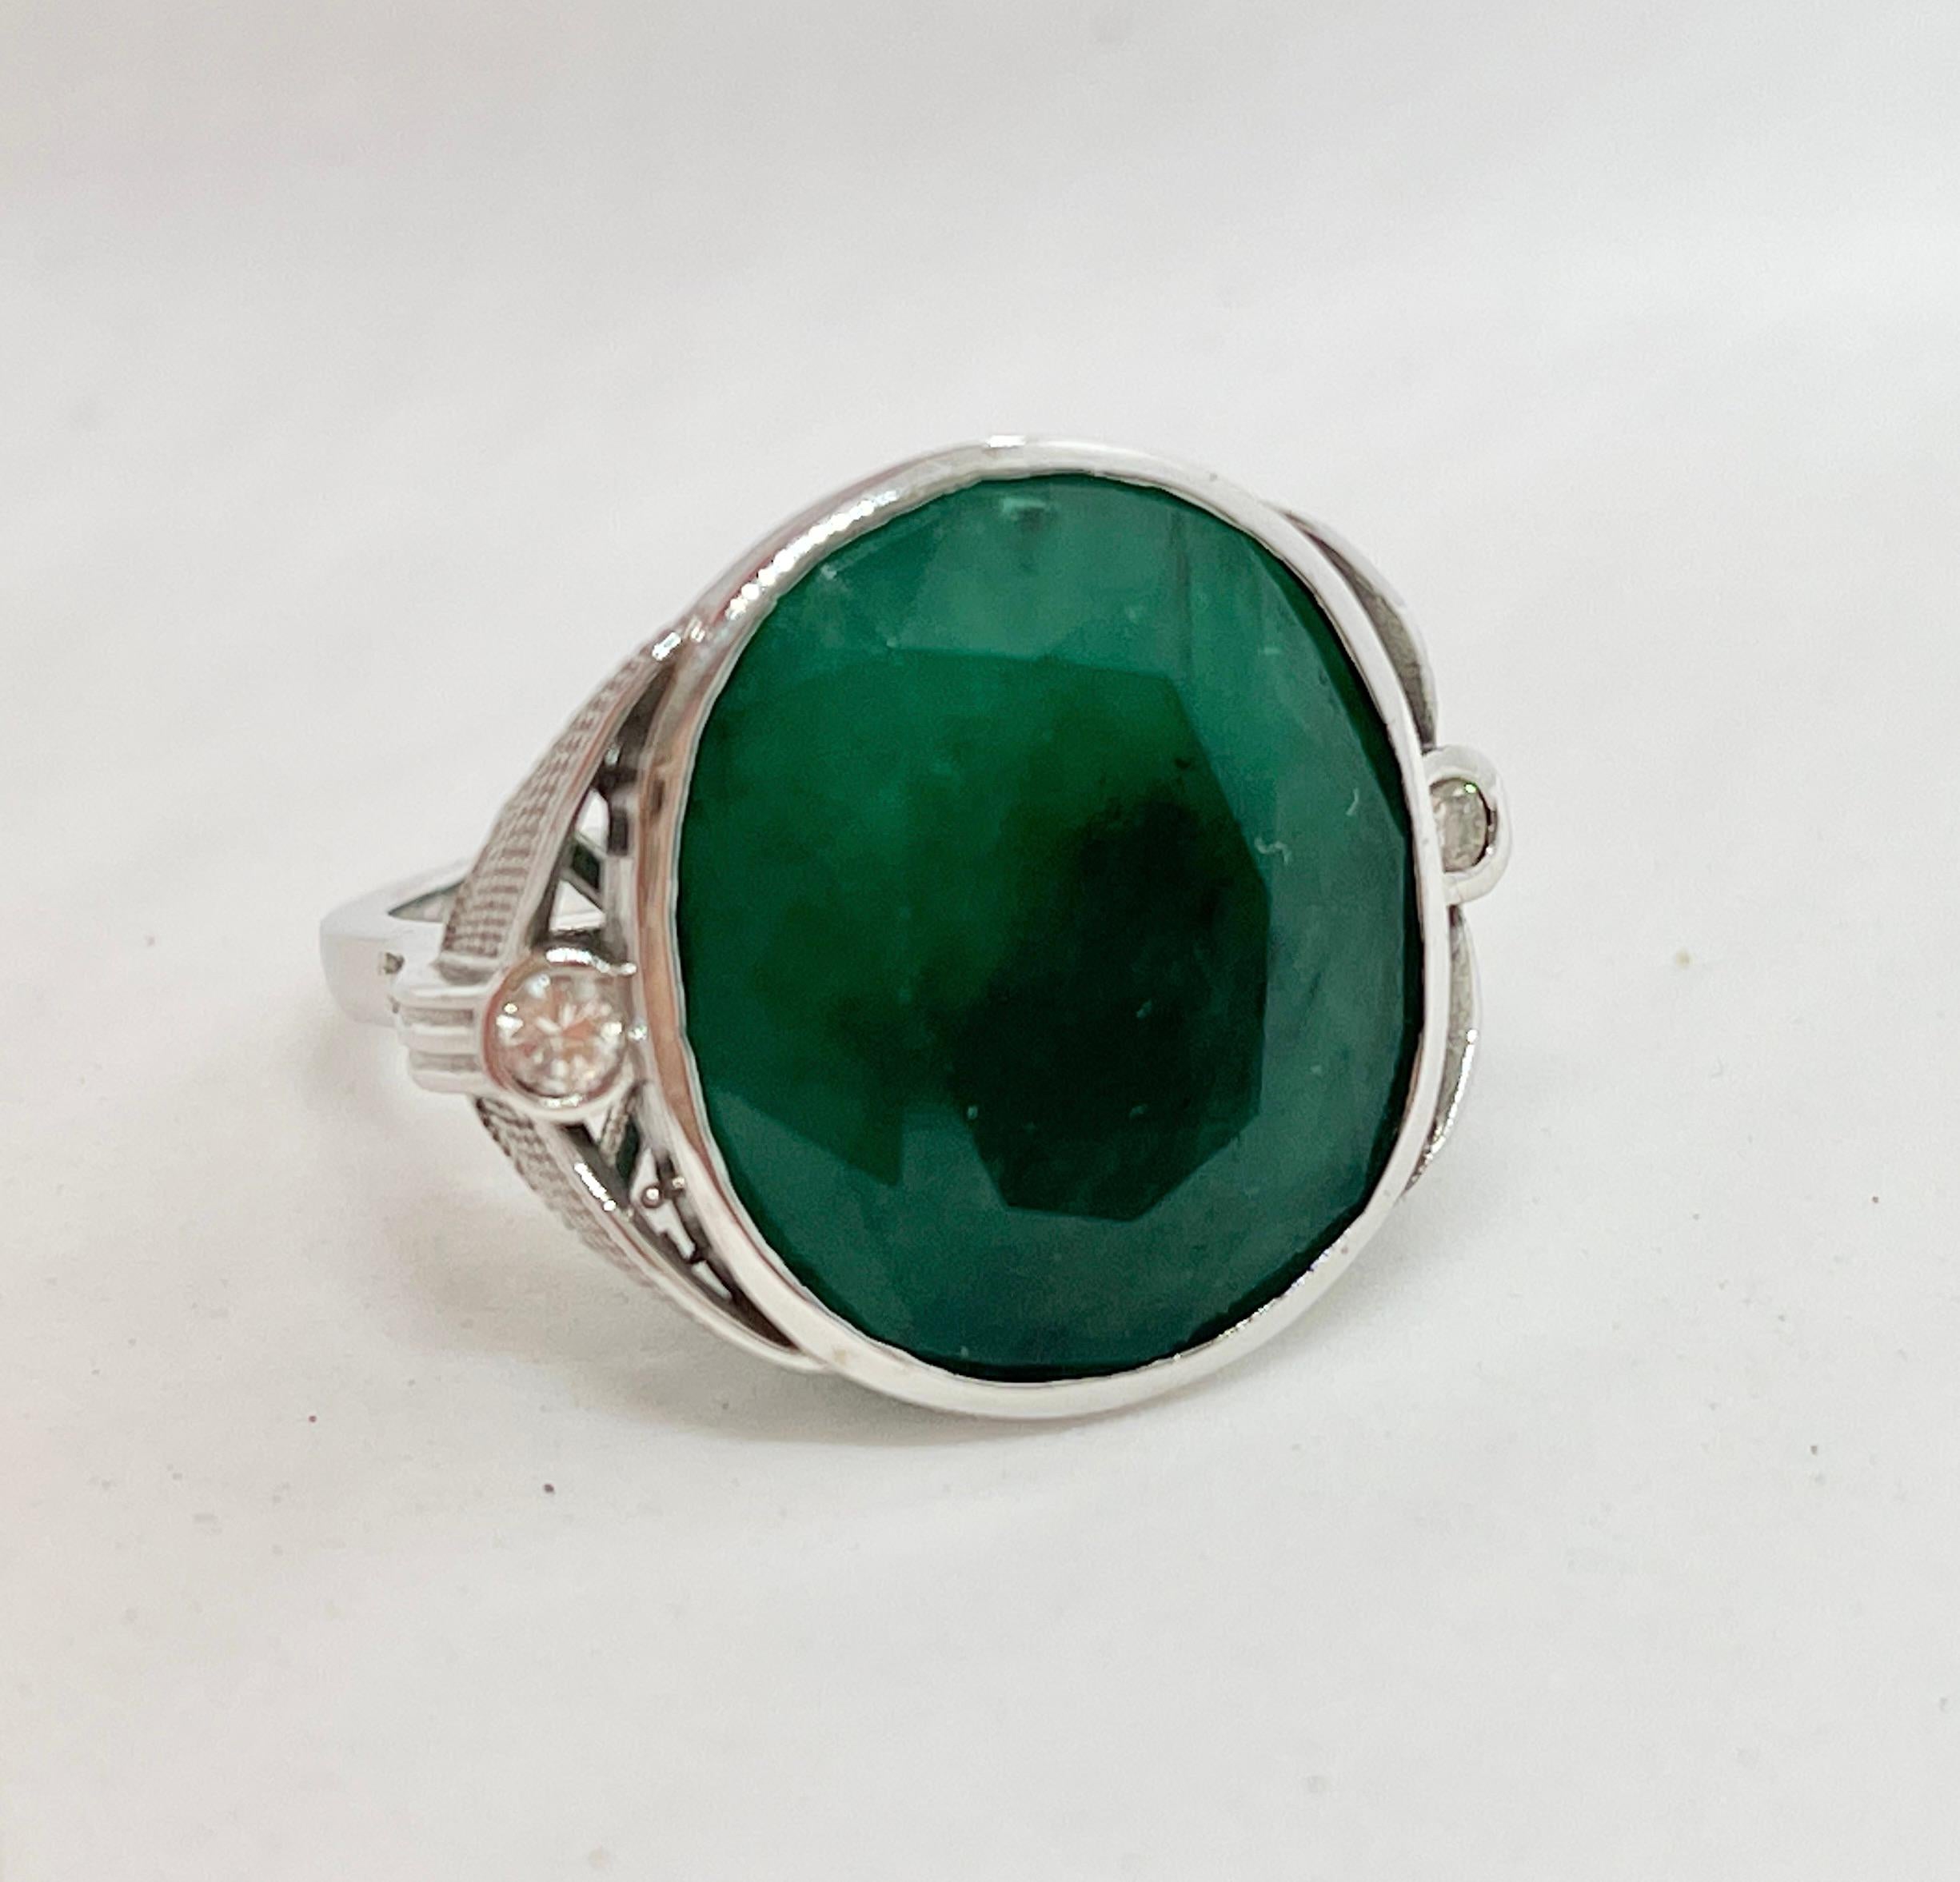 Amazing Huge 20CT Natural Emerald Diamond Ring 9ct White Gold with Valuation For Sale 5